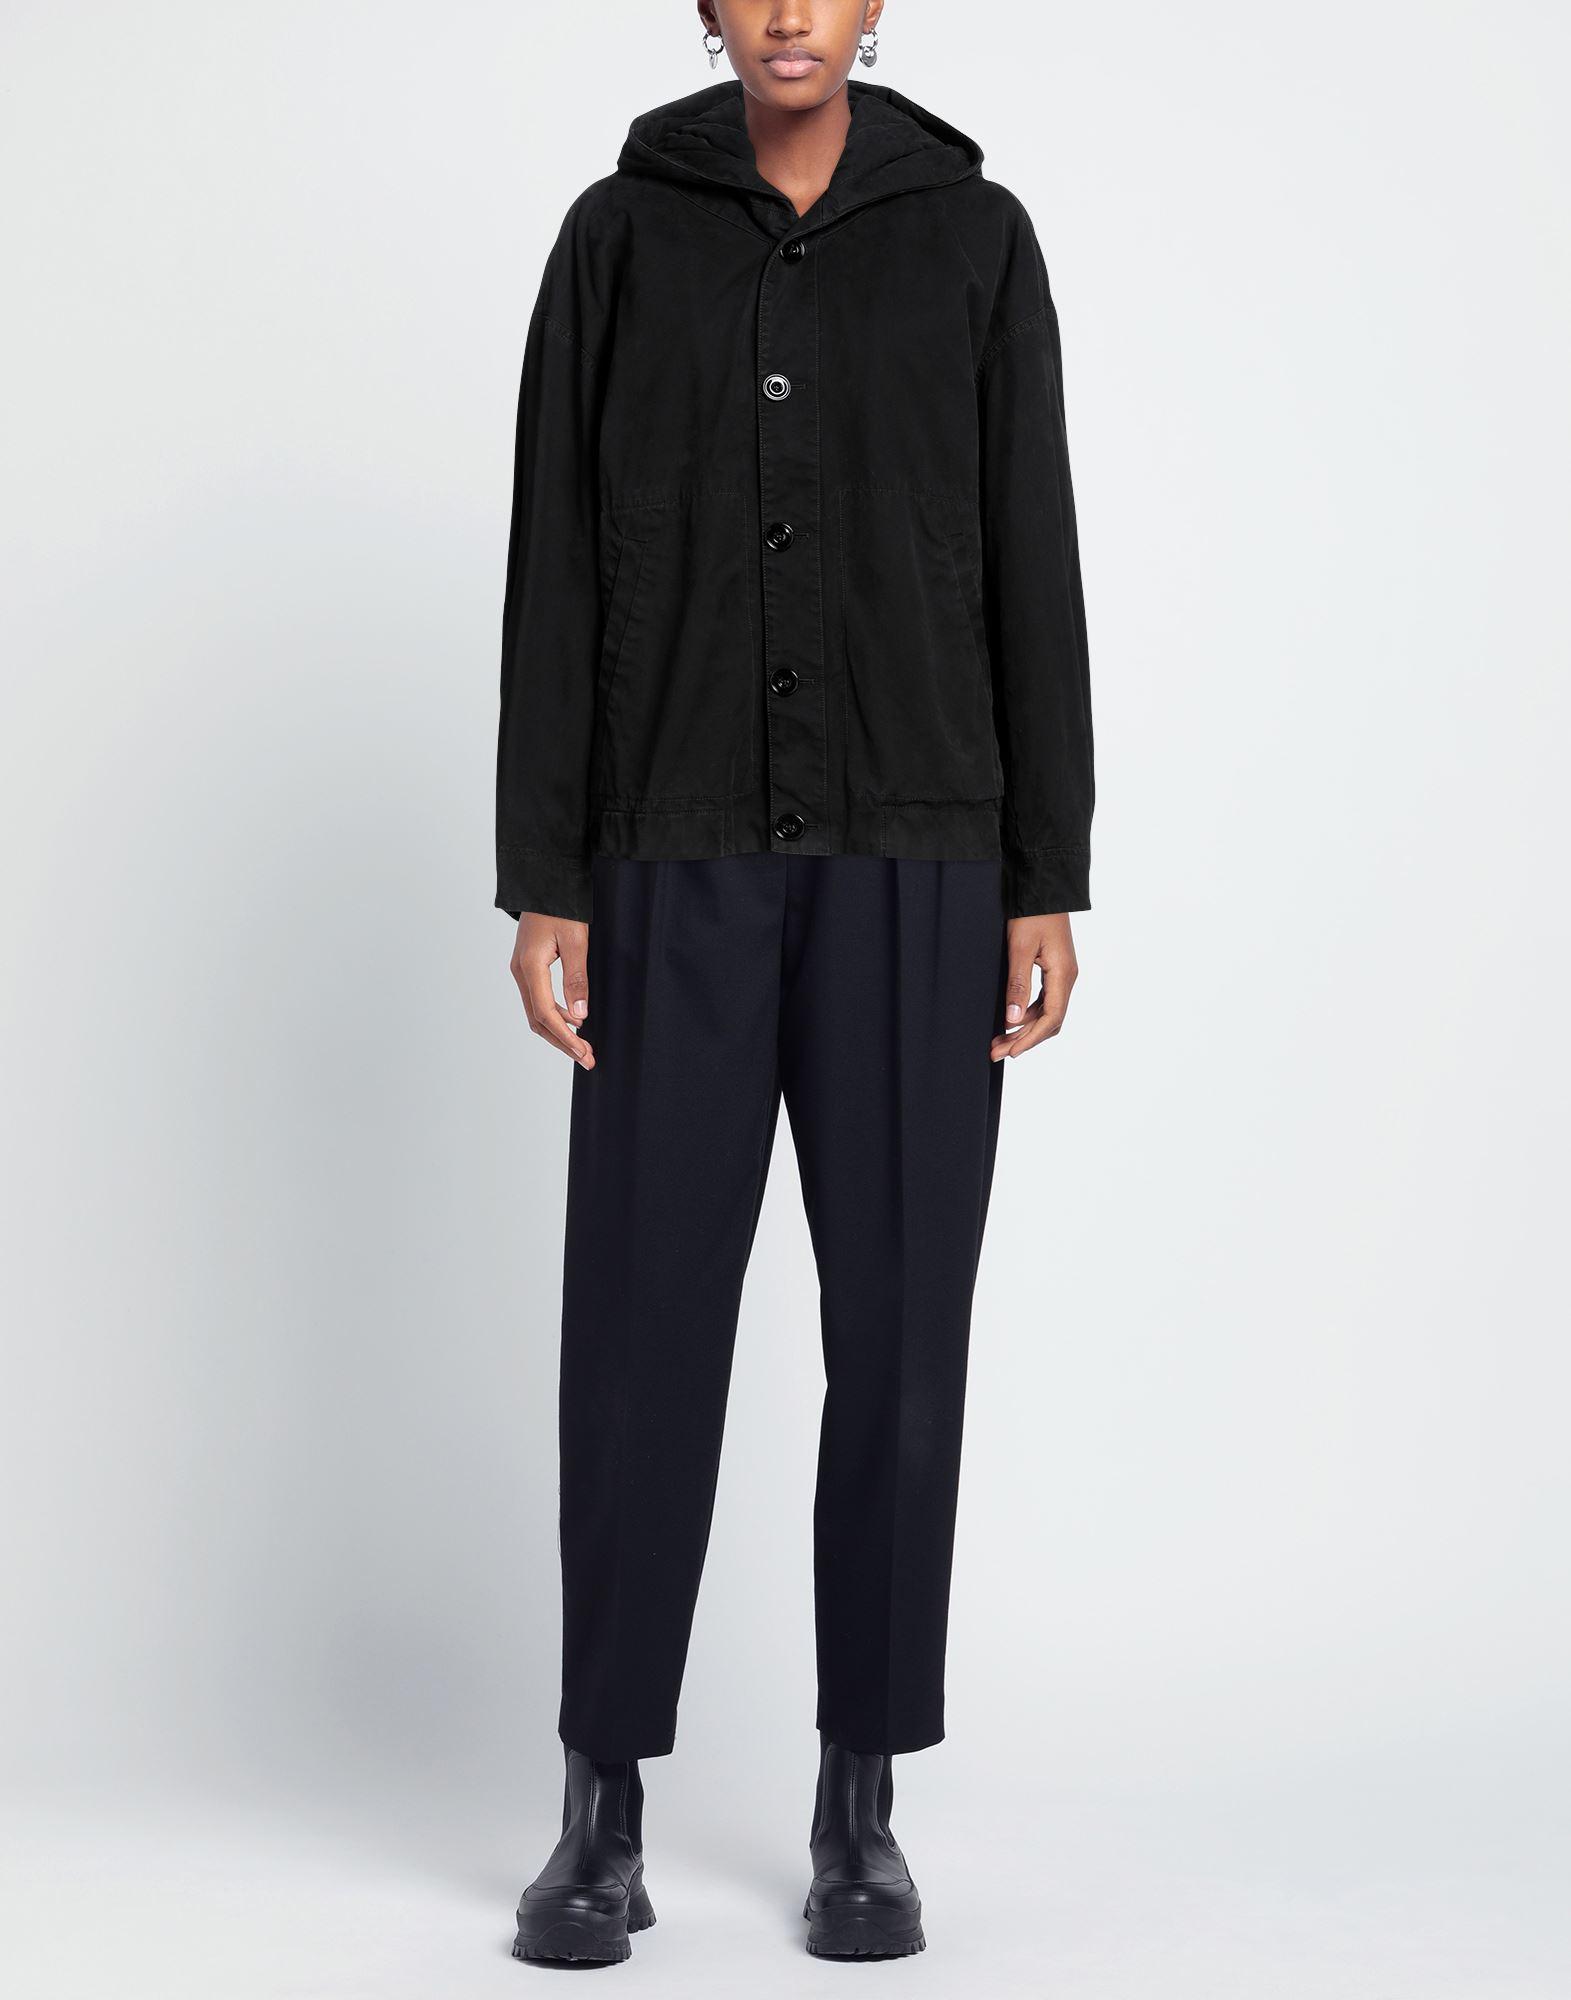 Lemaire Jacket in Black | Lyst